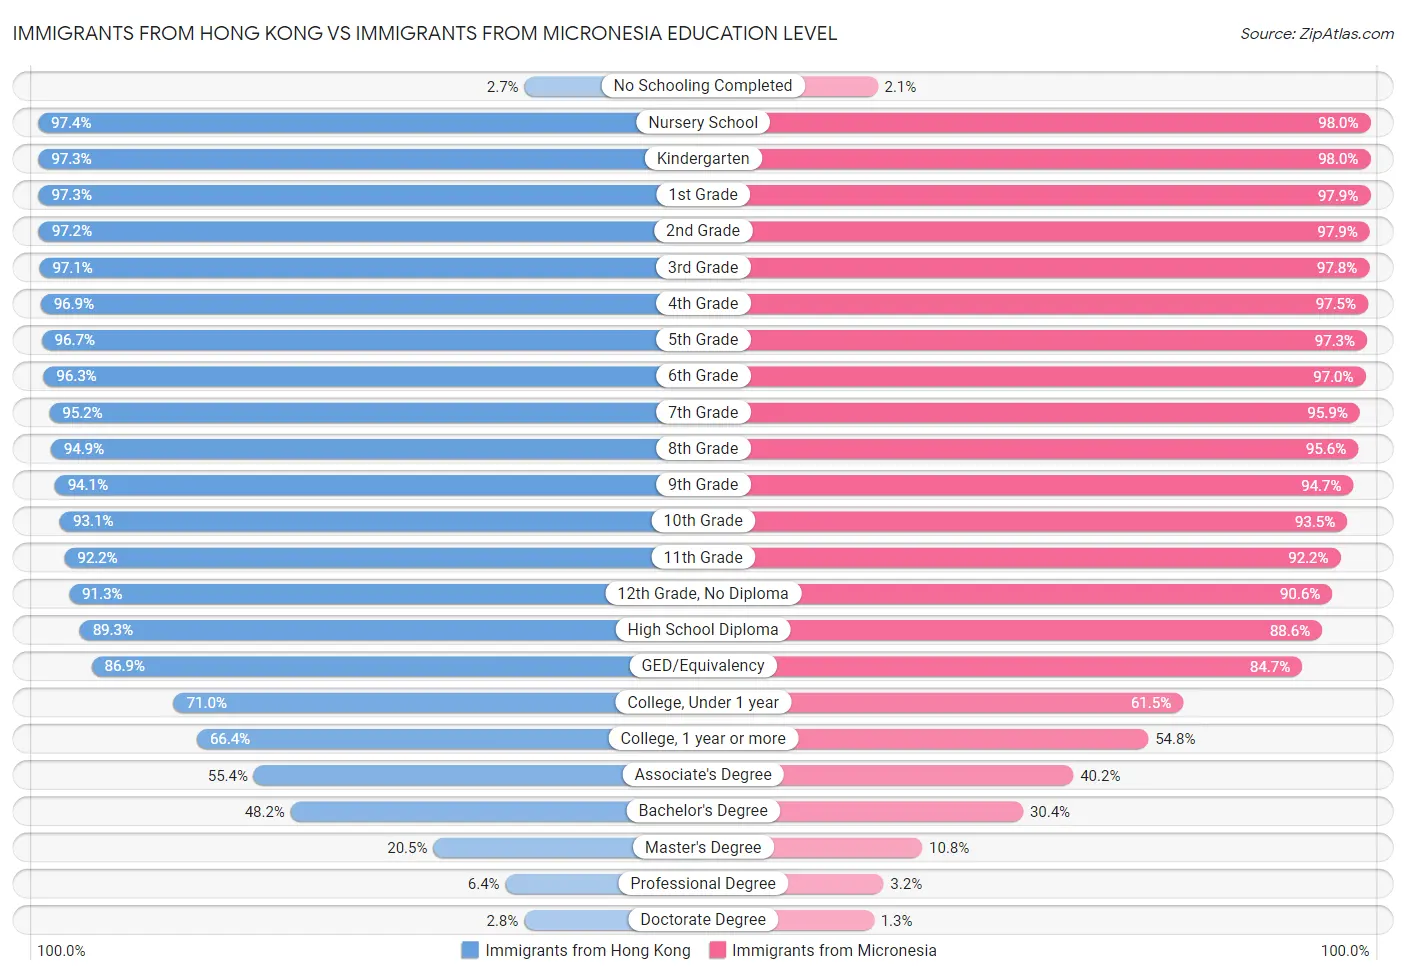 Immigrants from Hong Kong vs Immigrants from Micronesia Education Level